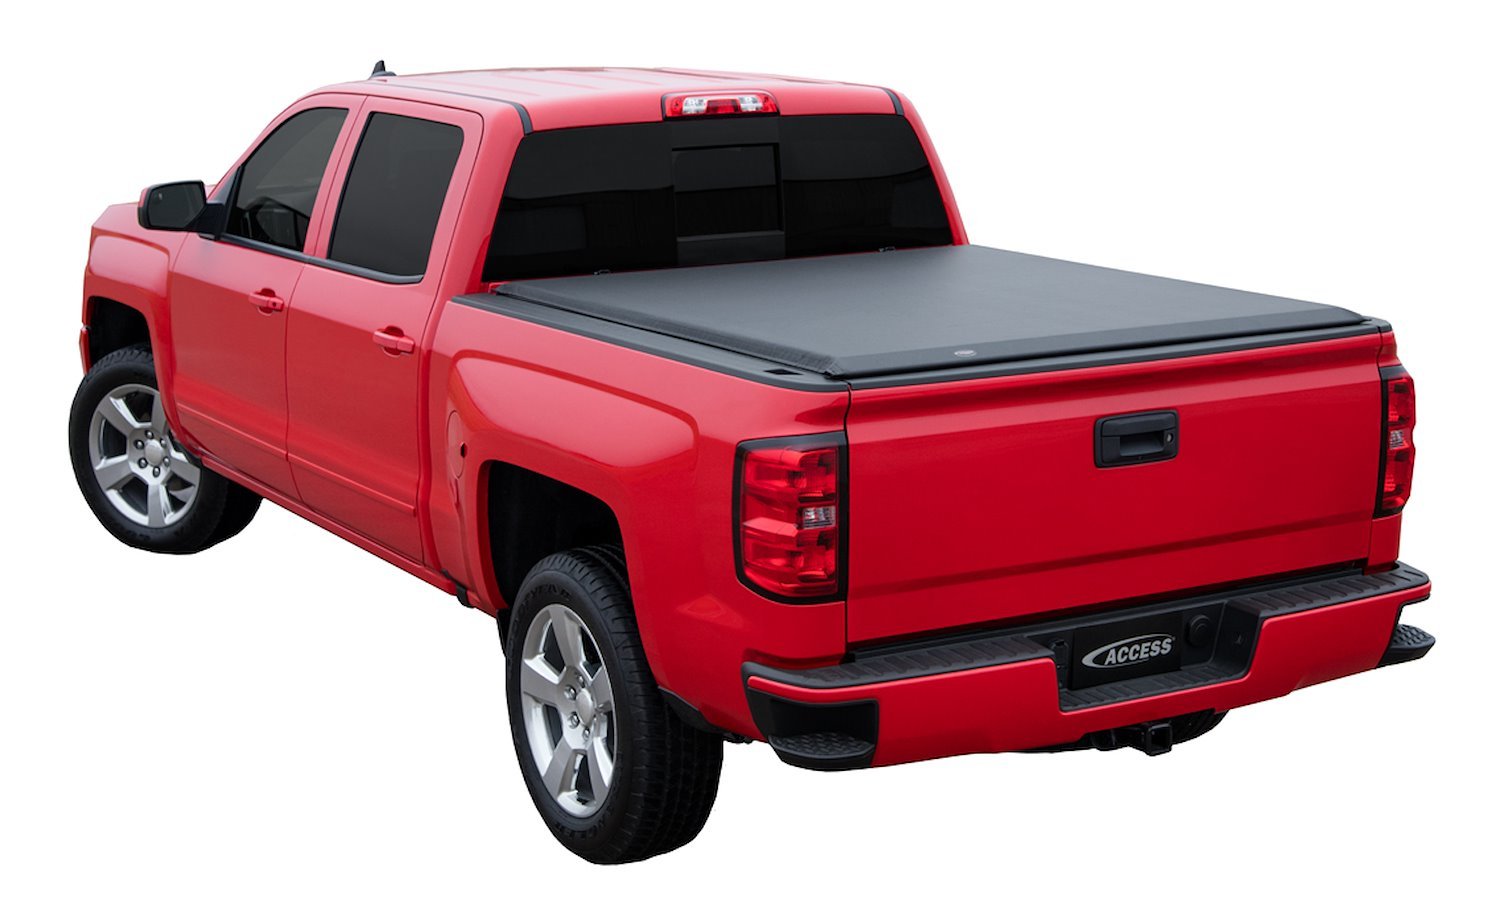 Original Roll-Up Tonneau Cover, 1999-2006 GM 1500, 2001-2006 GM 2500/3500 Pickup, 2007 Classic Pickup, with 6 ft. 6 in. Bed